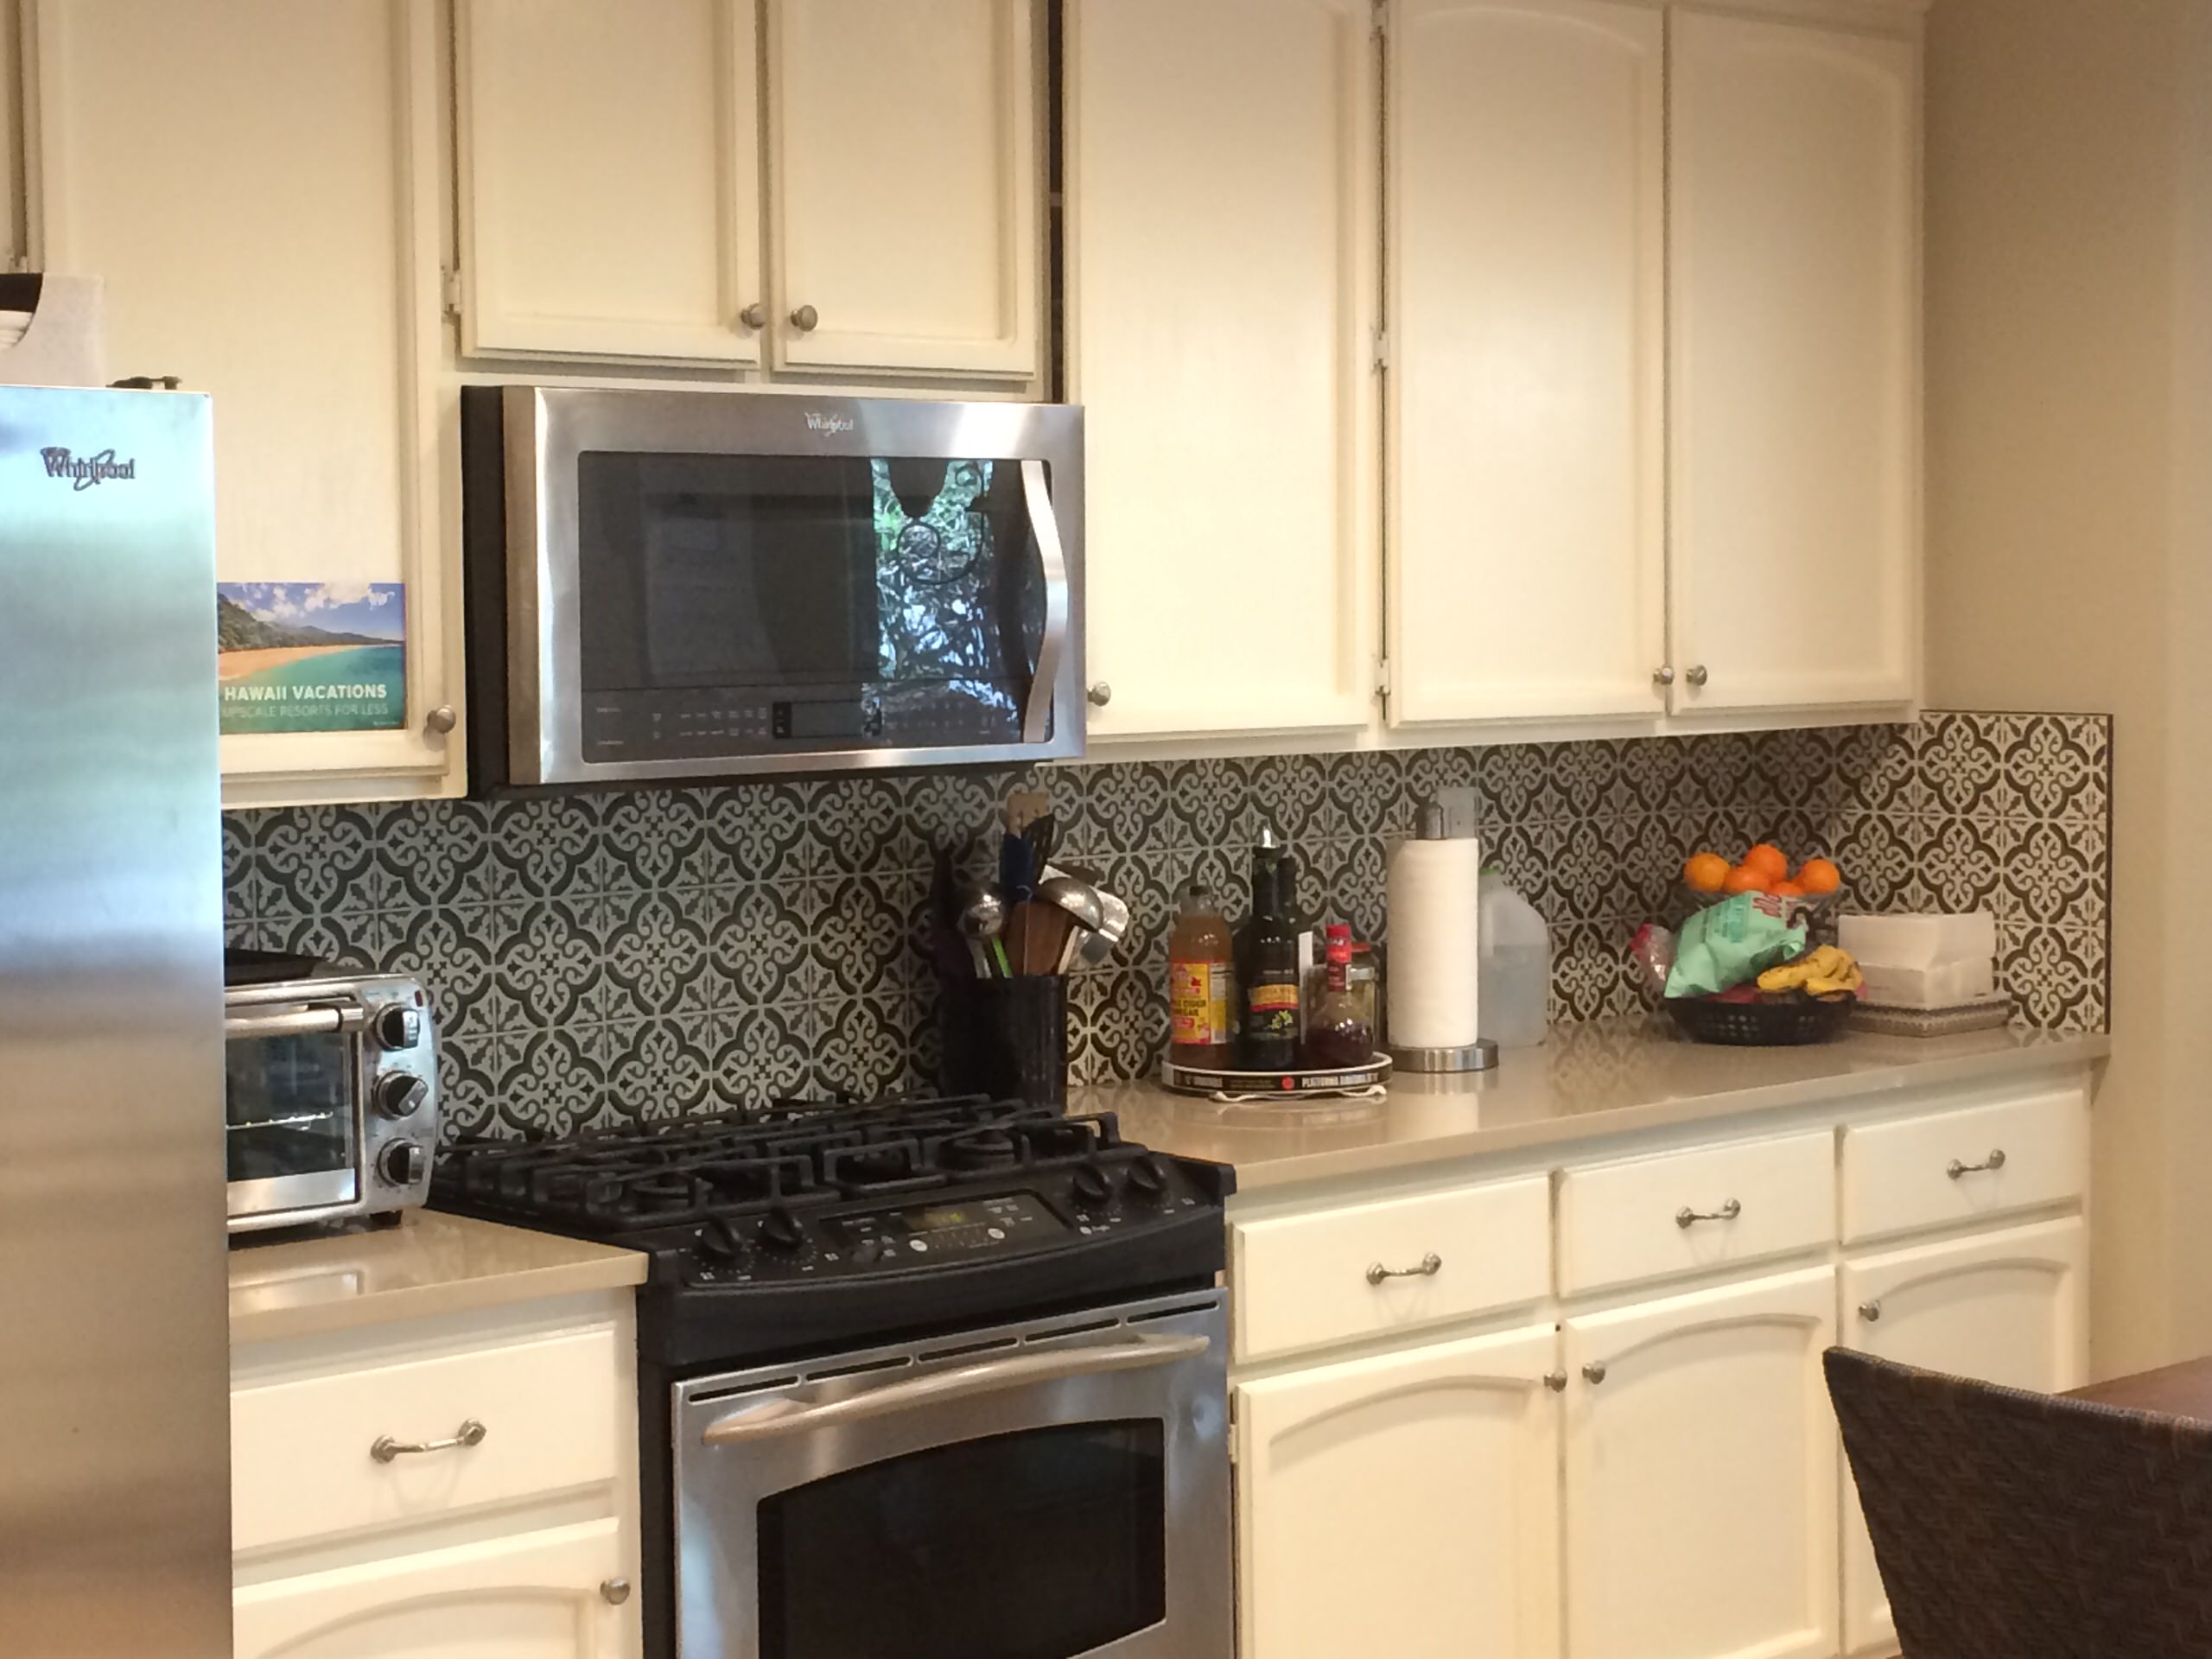 Same Cabinets, New Counter and Back Splash Transform the Kitchen!